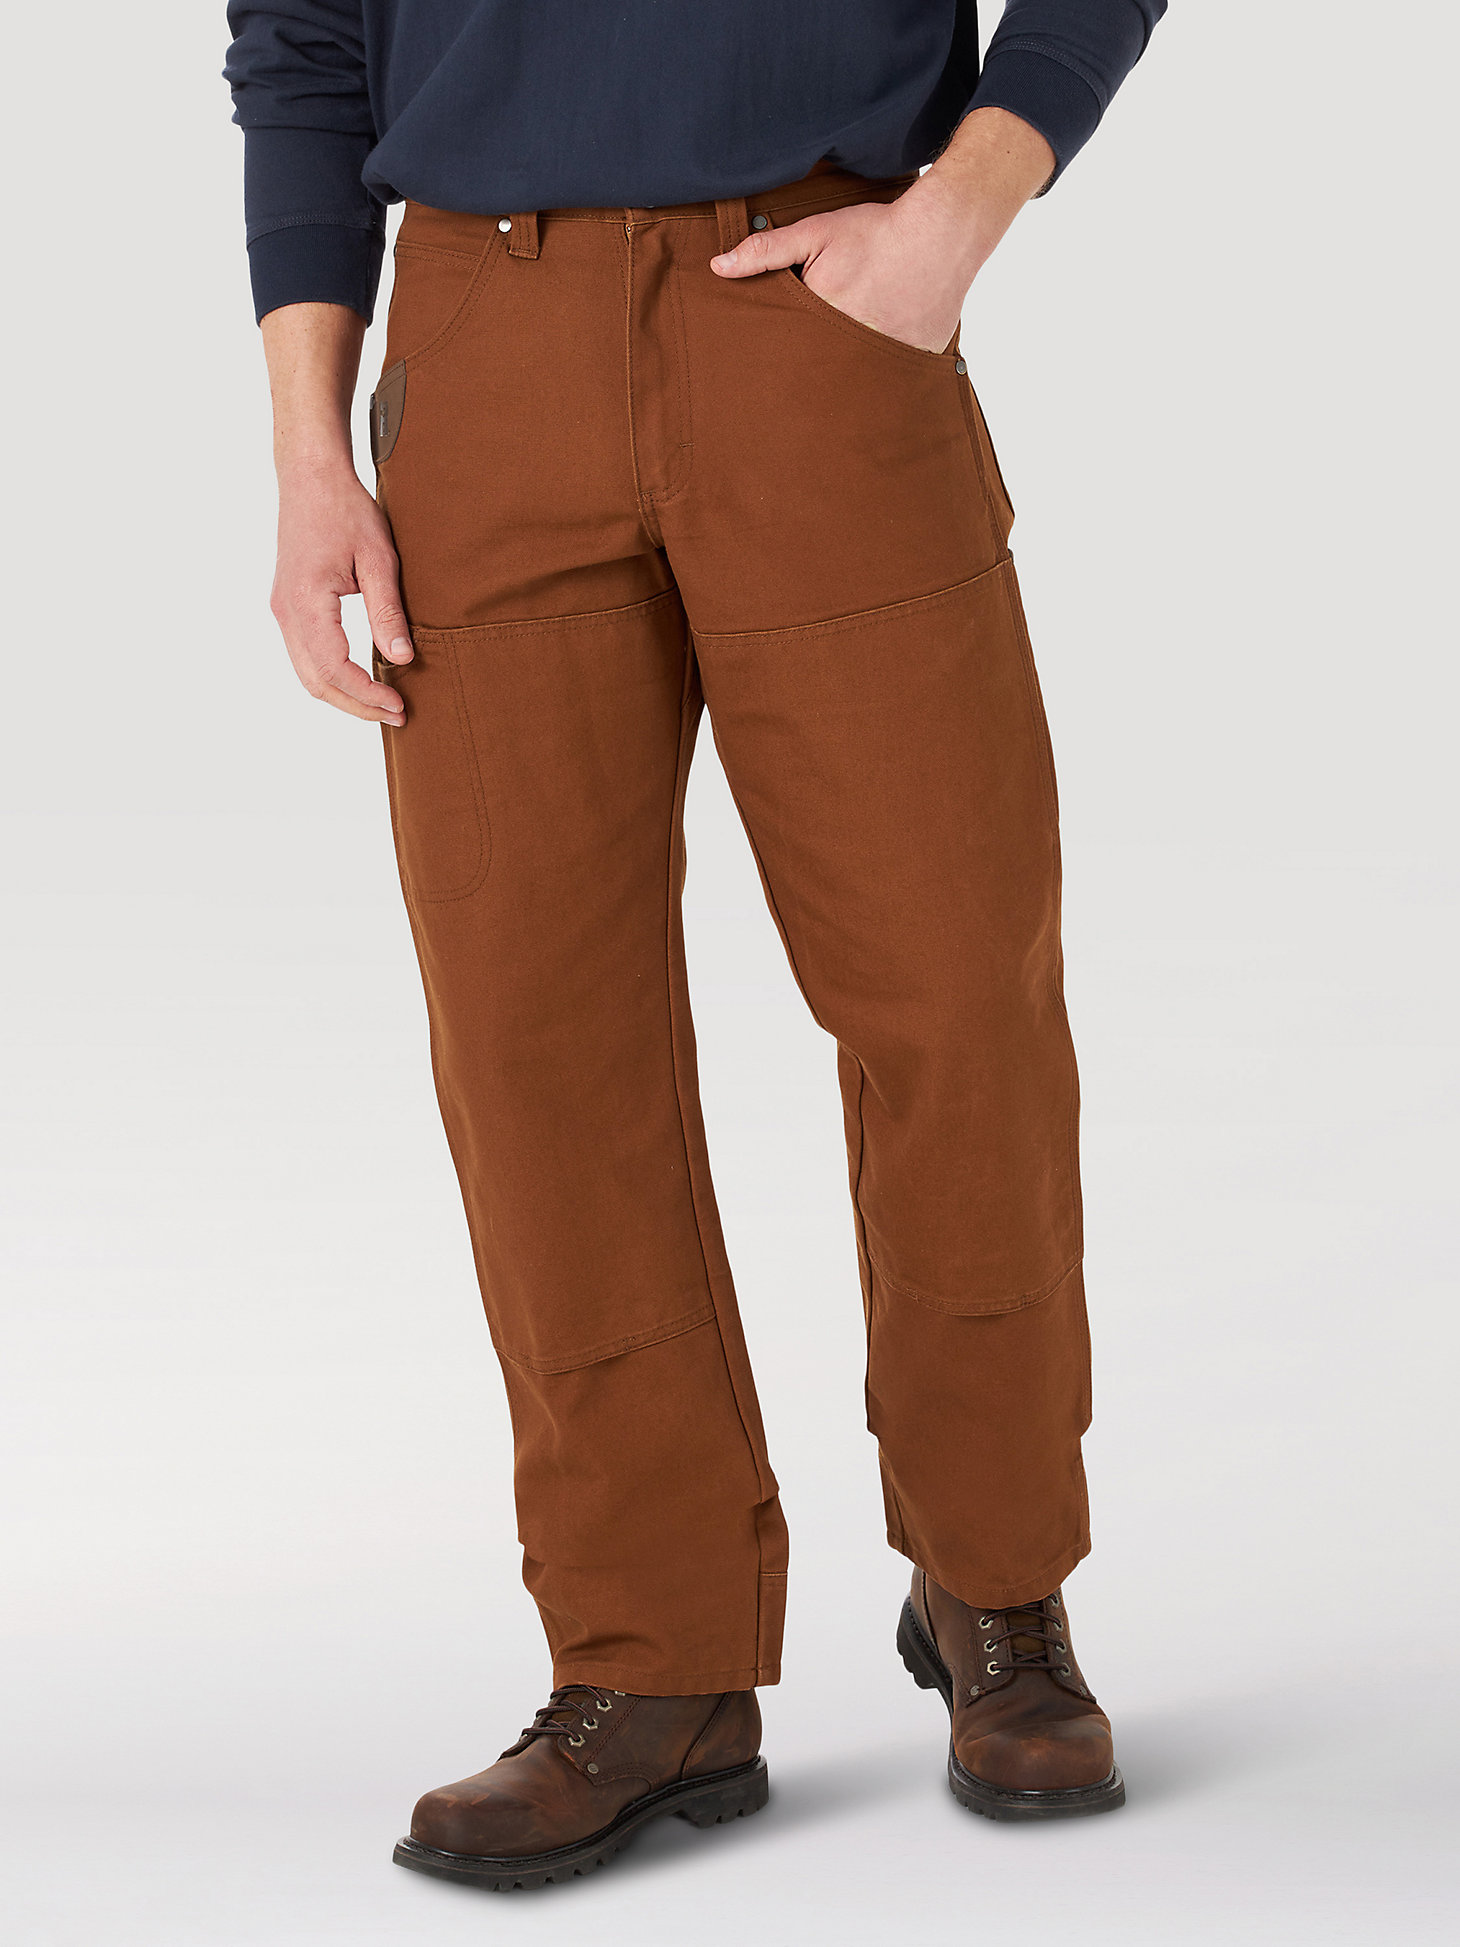 Wrangler® RIGGS Workwear® Mason Relaxed Fit Canvas Pant in Toffee Brown alternative view 1